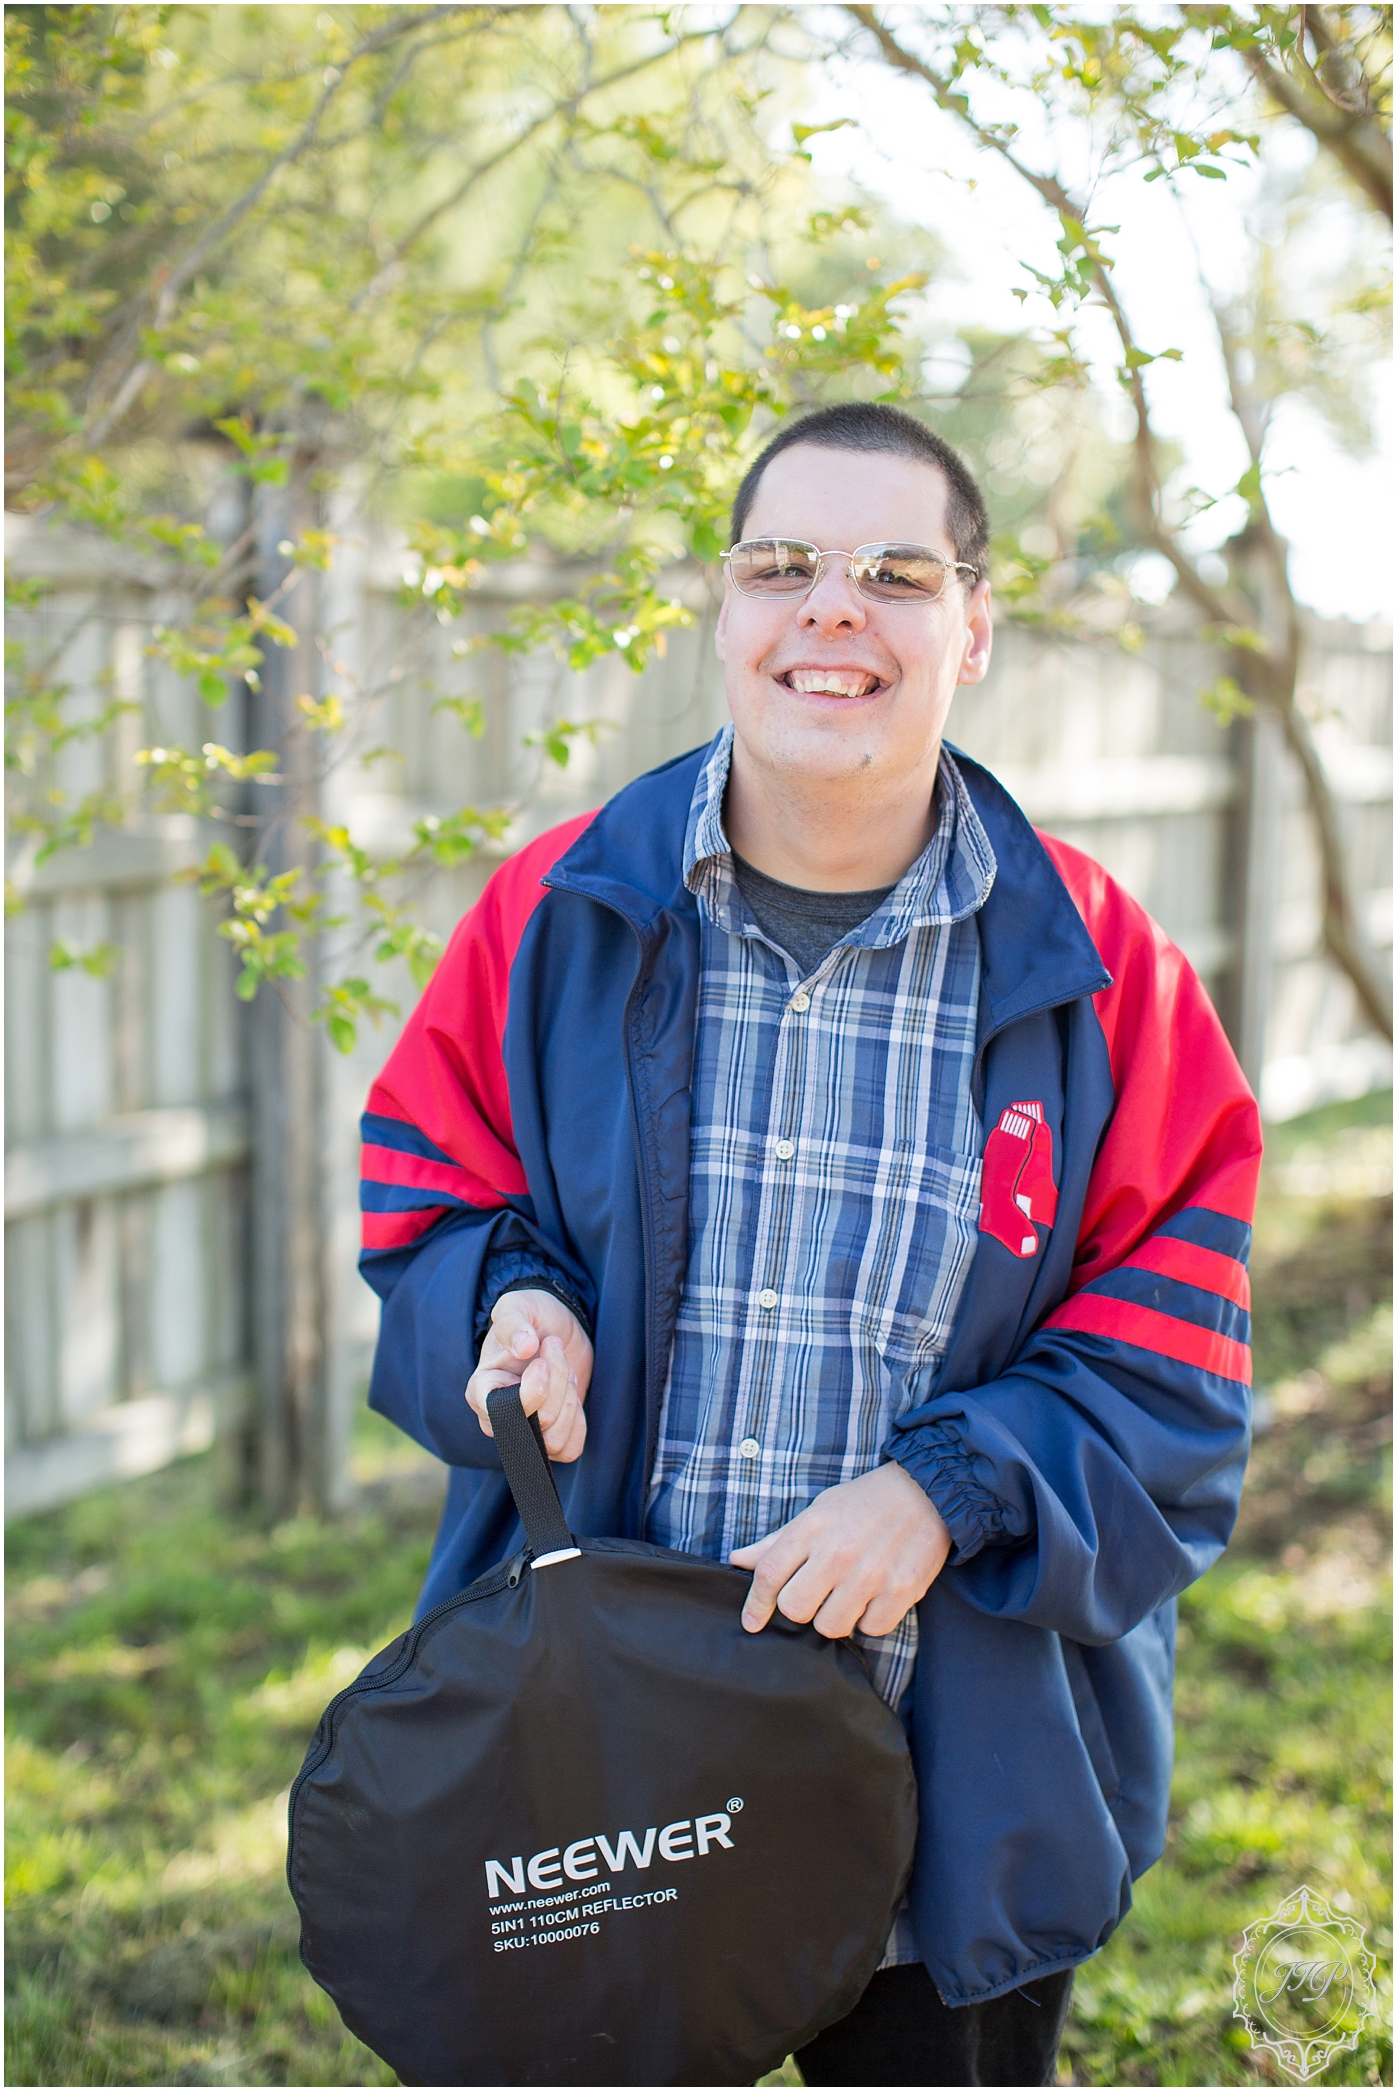 Autistic adult male wearing a striped shirt smiles at the camera while holding a reflector while standing in front of a fence and naturally lit tree in Columbia, South Carolina.